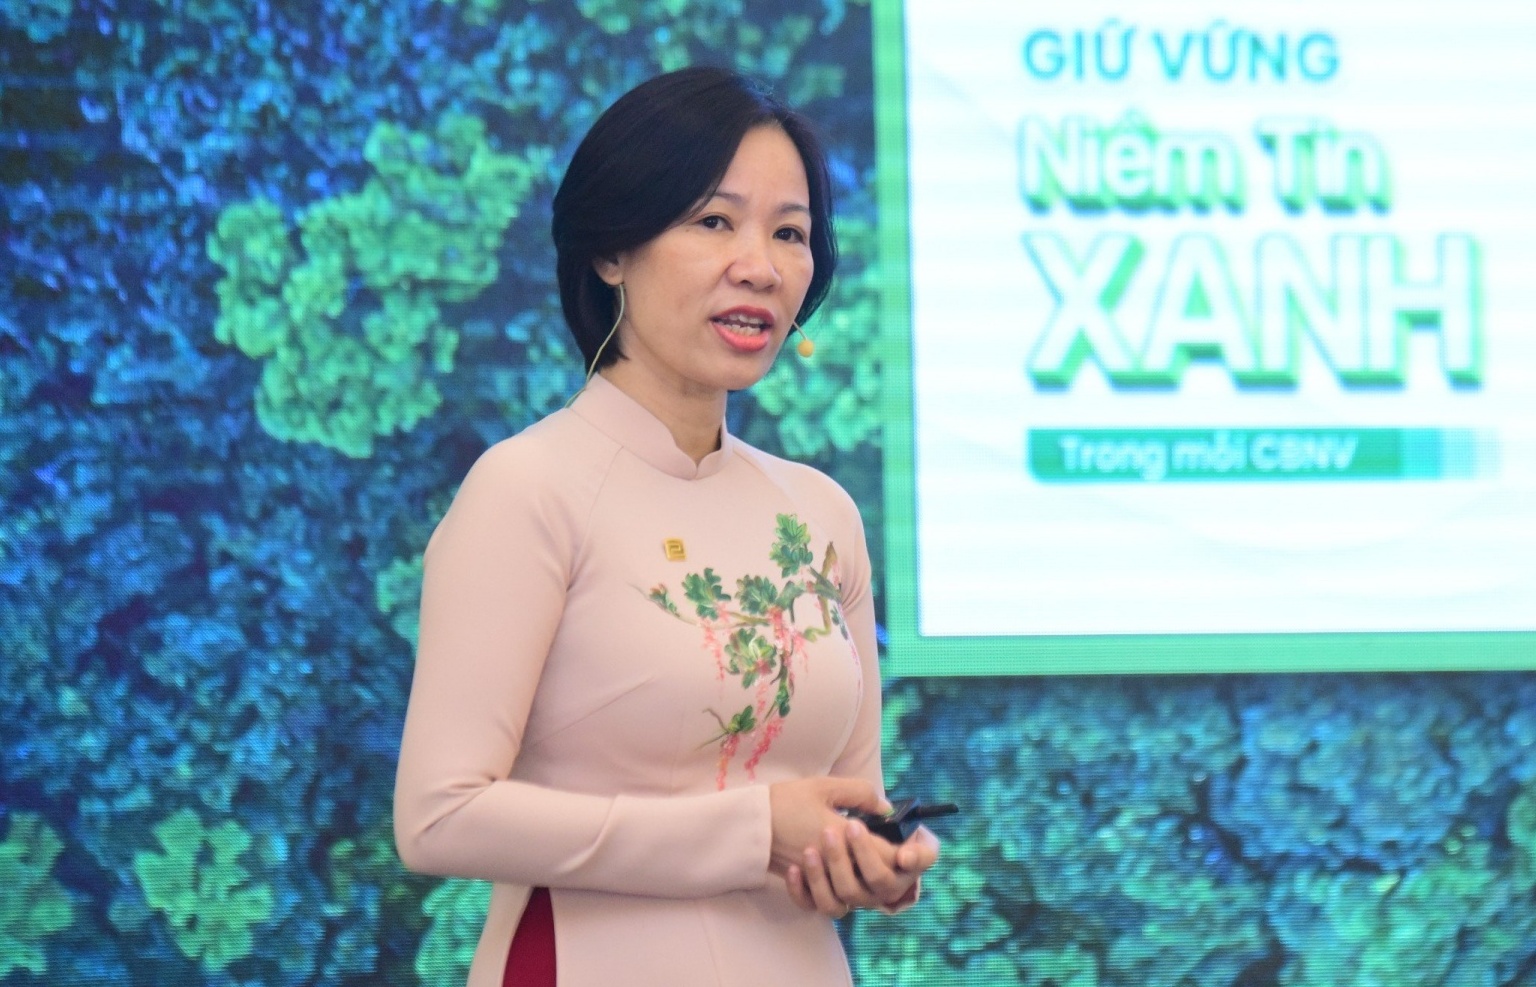 Phuc Khang focuses on strategy developing high-rise green buildings